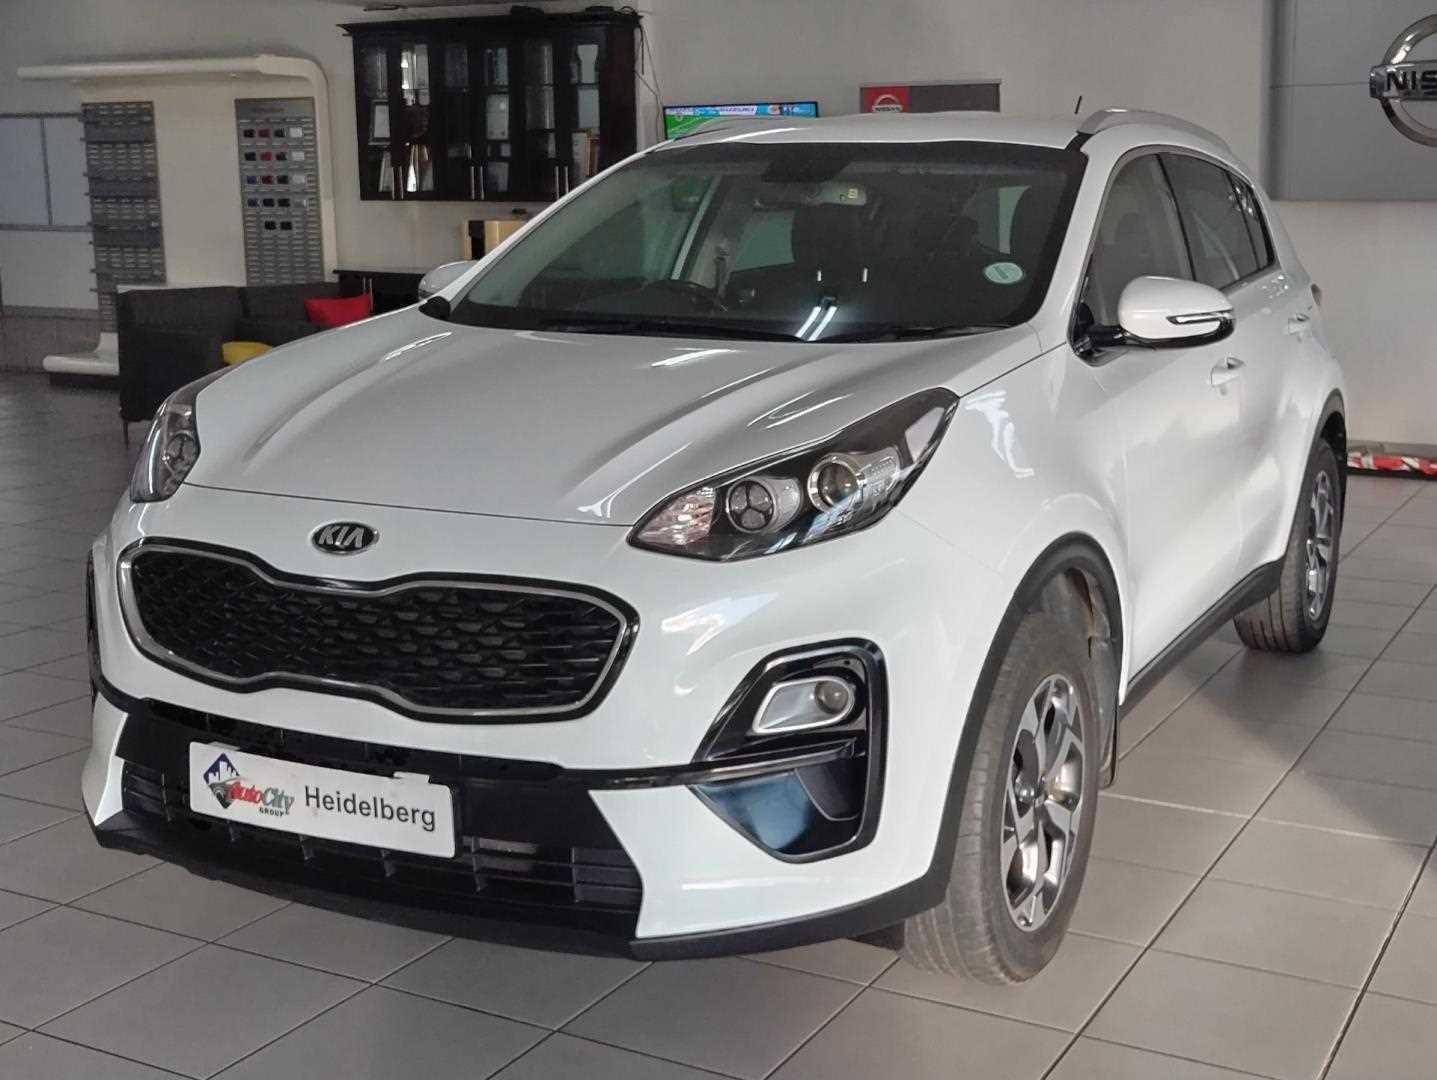 KIA SPORTAGE 2.0 IGNITE + A/T for Sale in South Africa